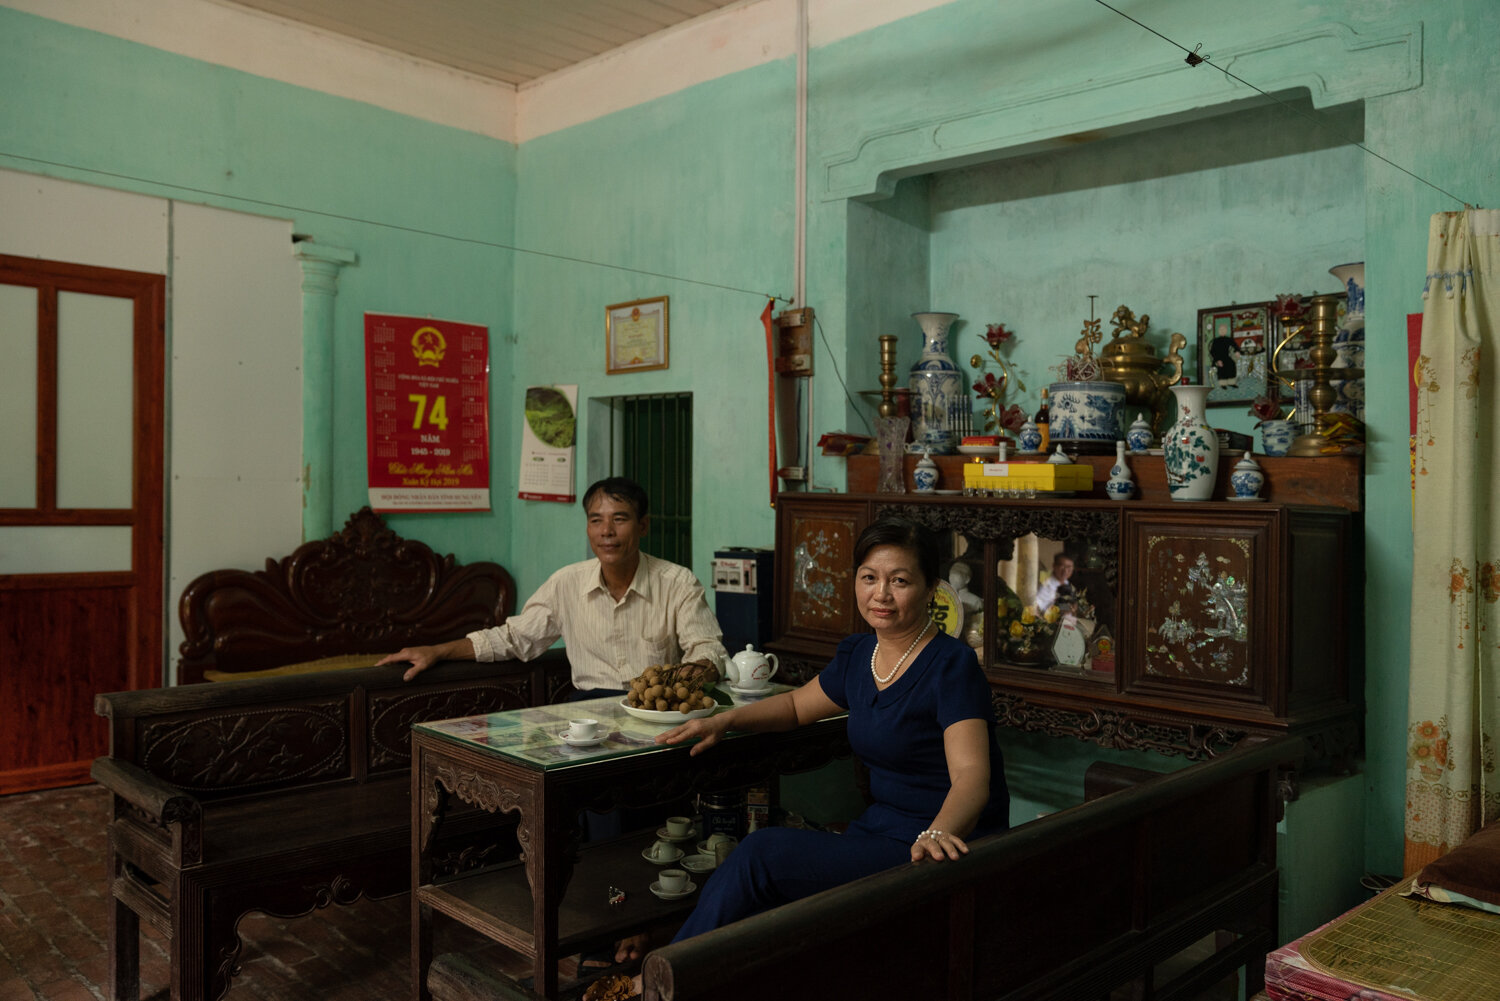  July 15, 2019 - Hung Yen, Vietnam. TRINH THI MINH Tuyet (49) in her home. The family grow Longans, she is chair woman of the Woman's Union. She receives her VSS subcription free from the government. © Nicolas Axelrod / Ruom 